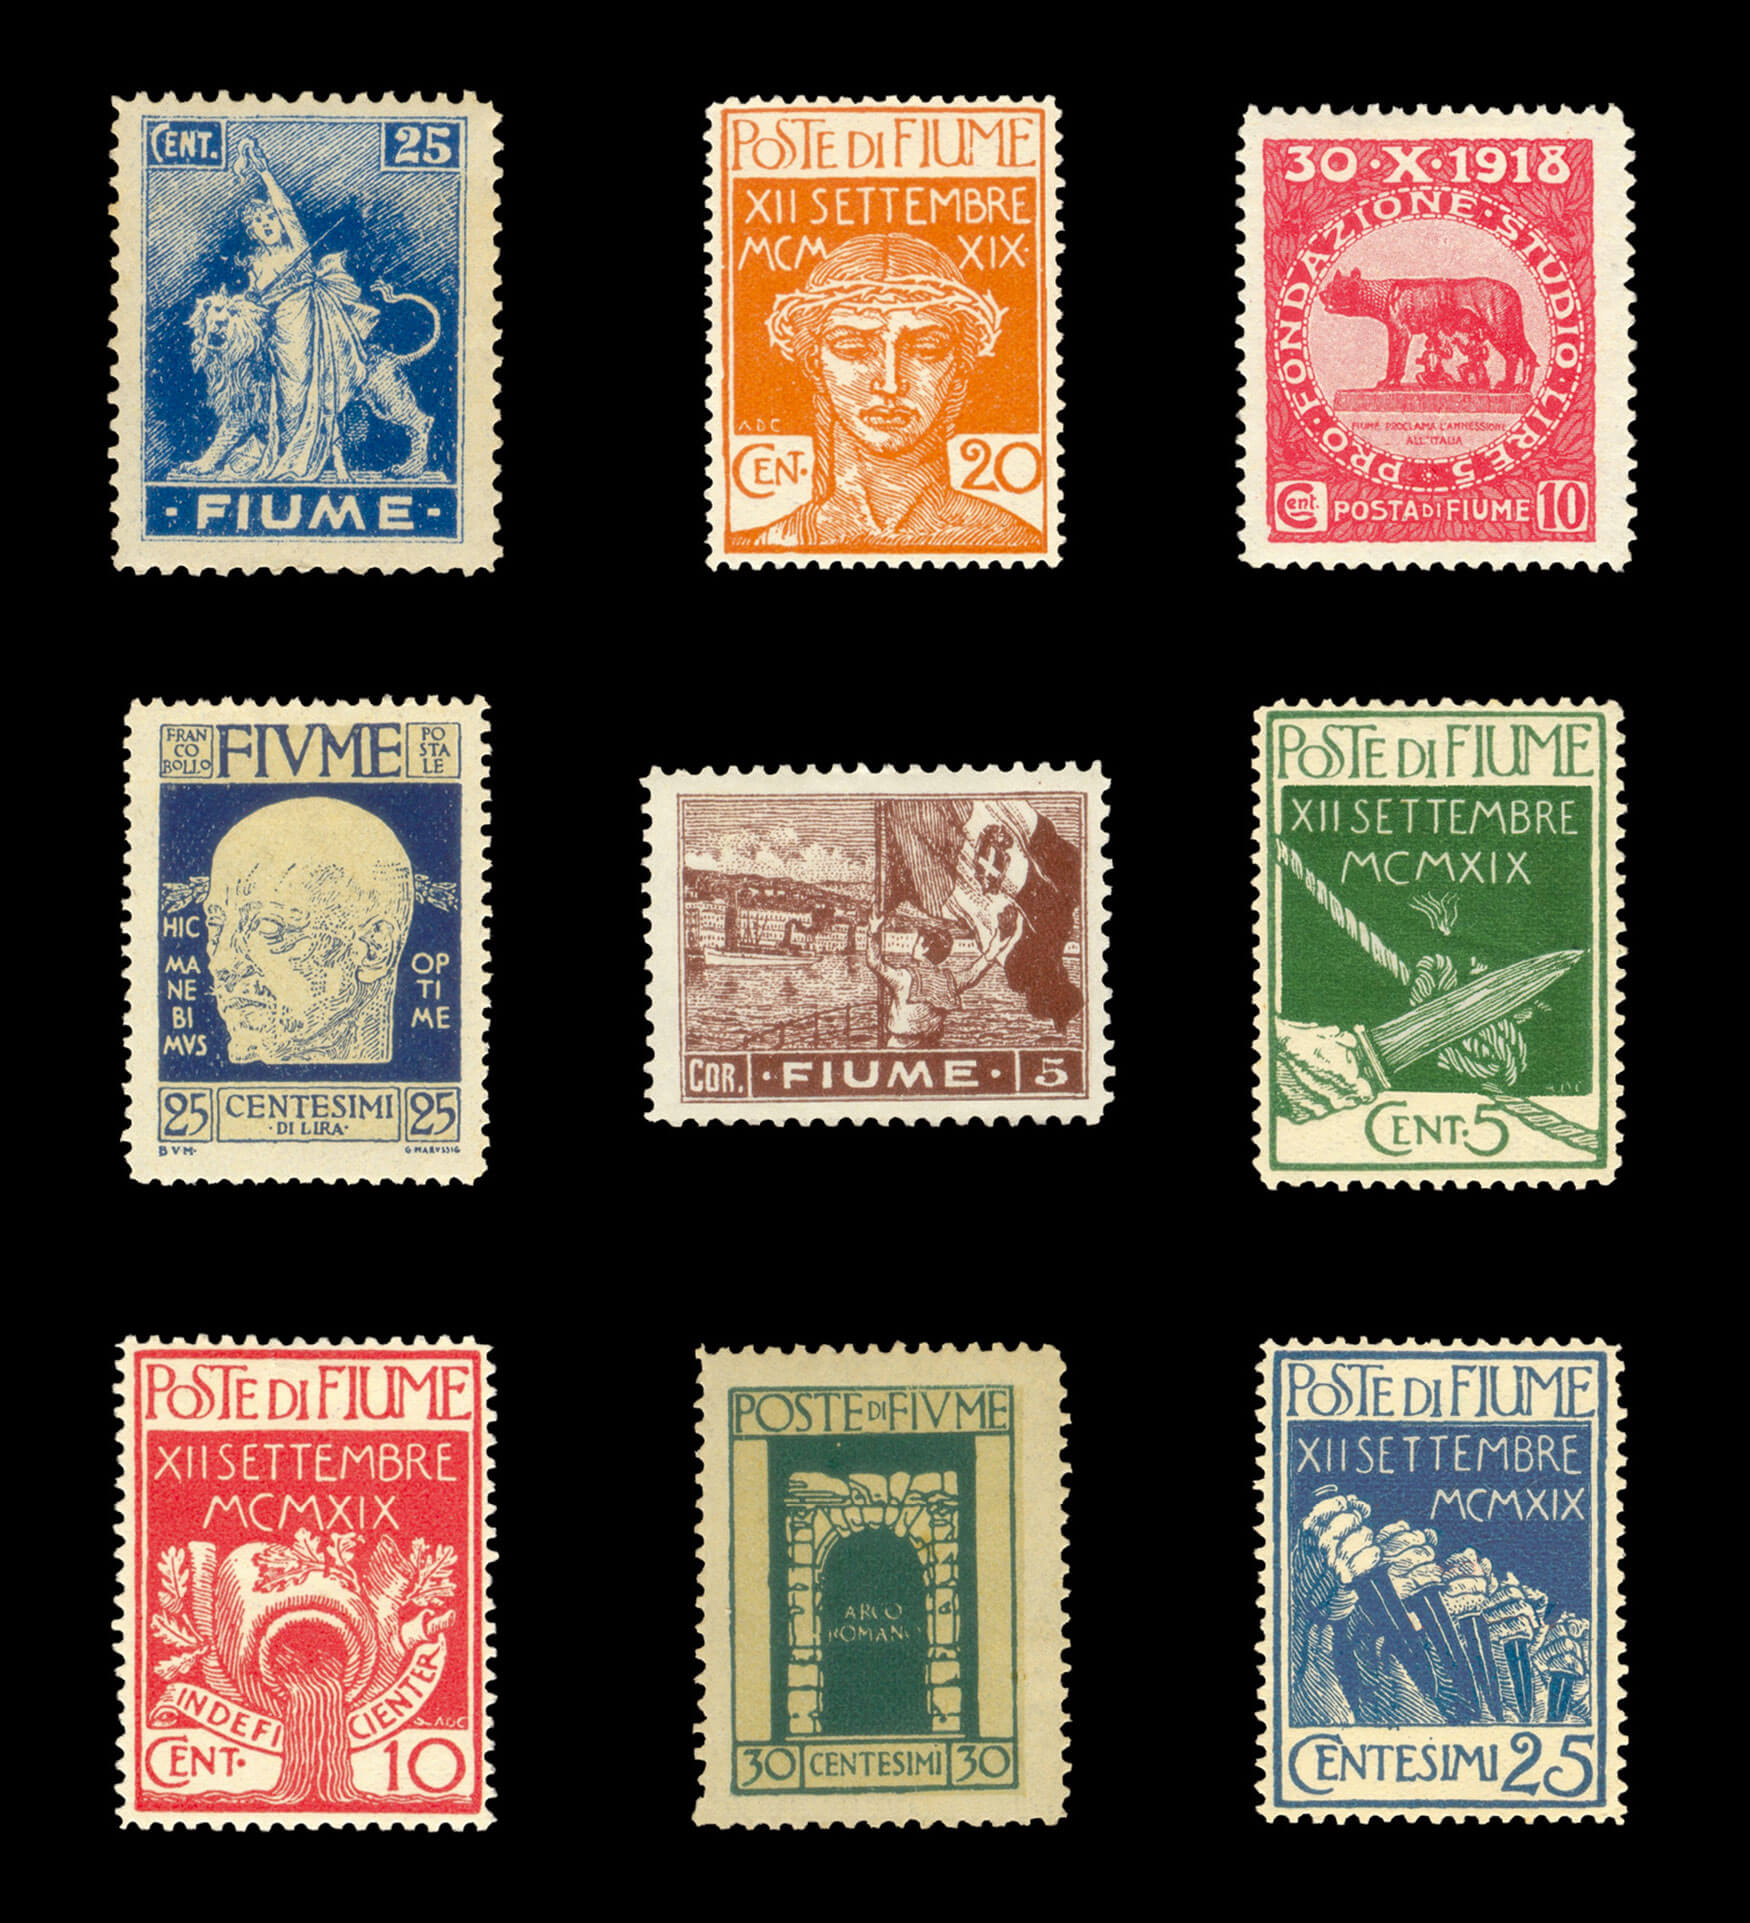 A selection of Fiumean stamps issued during D’Annunzio’s occupation of the city. Note the variety of symbols recalling the Roman empire. The stamp at the center of the left column features a portrait of D’Annunzio himself. Courtesy Ivan Martinaš.